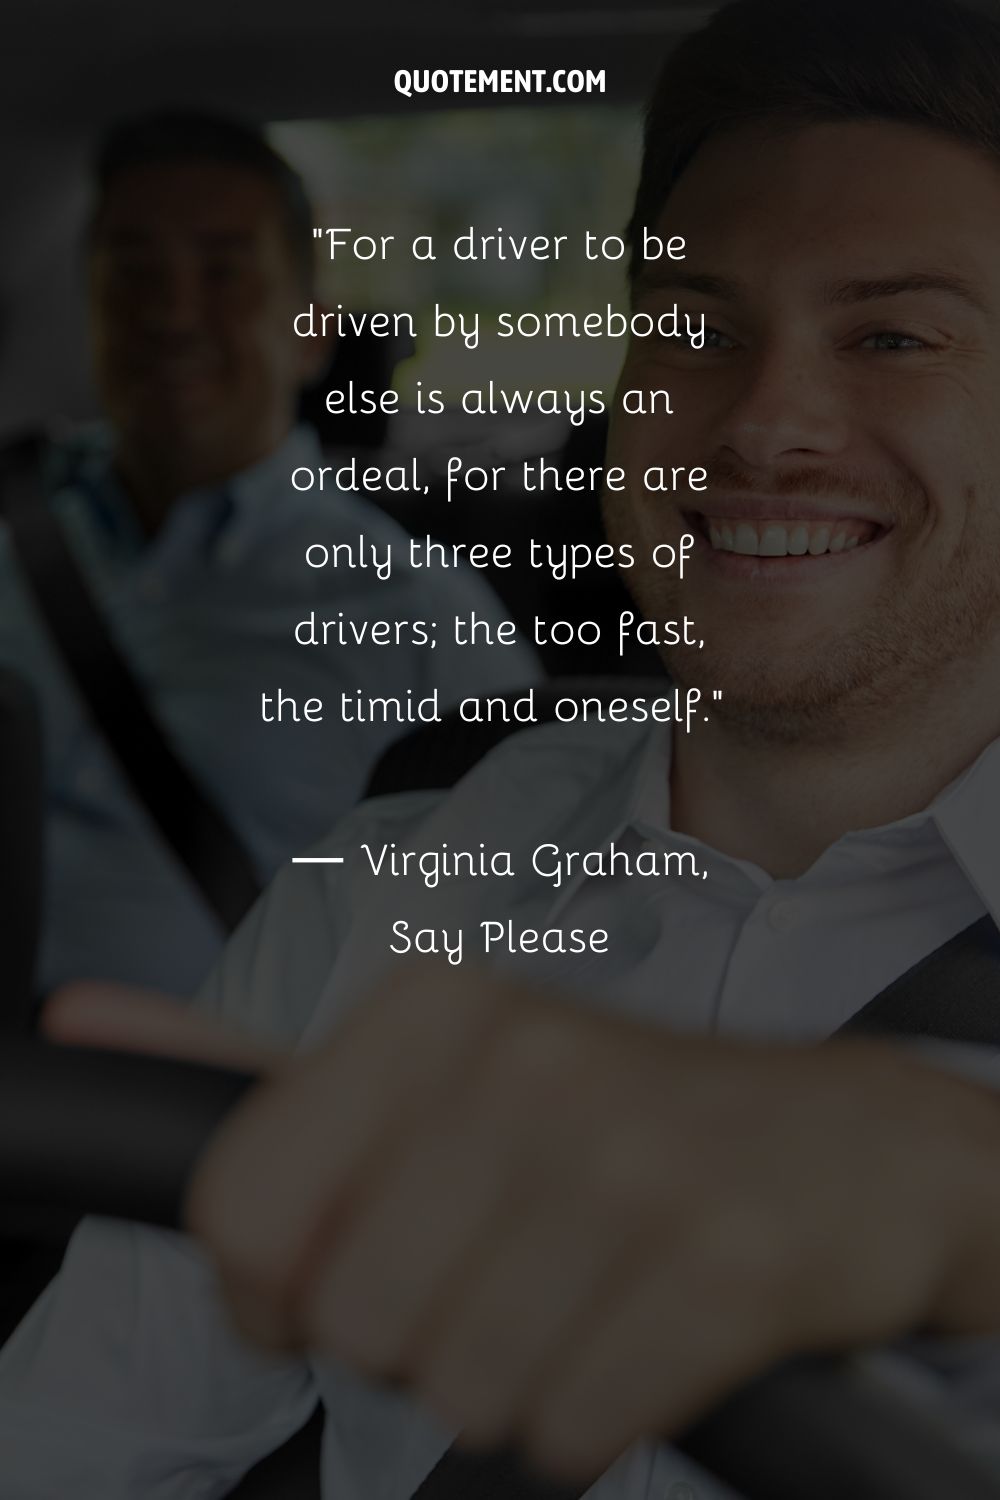 For a driver to be driven by somebody else is always an ordeal, for there are only three types of drivers; the too fast, the timid and oneself.